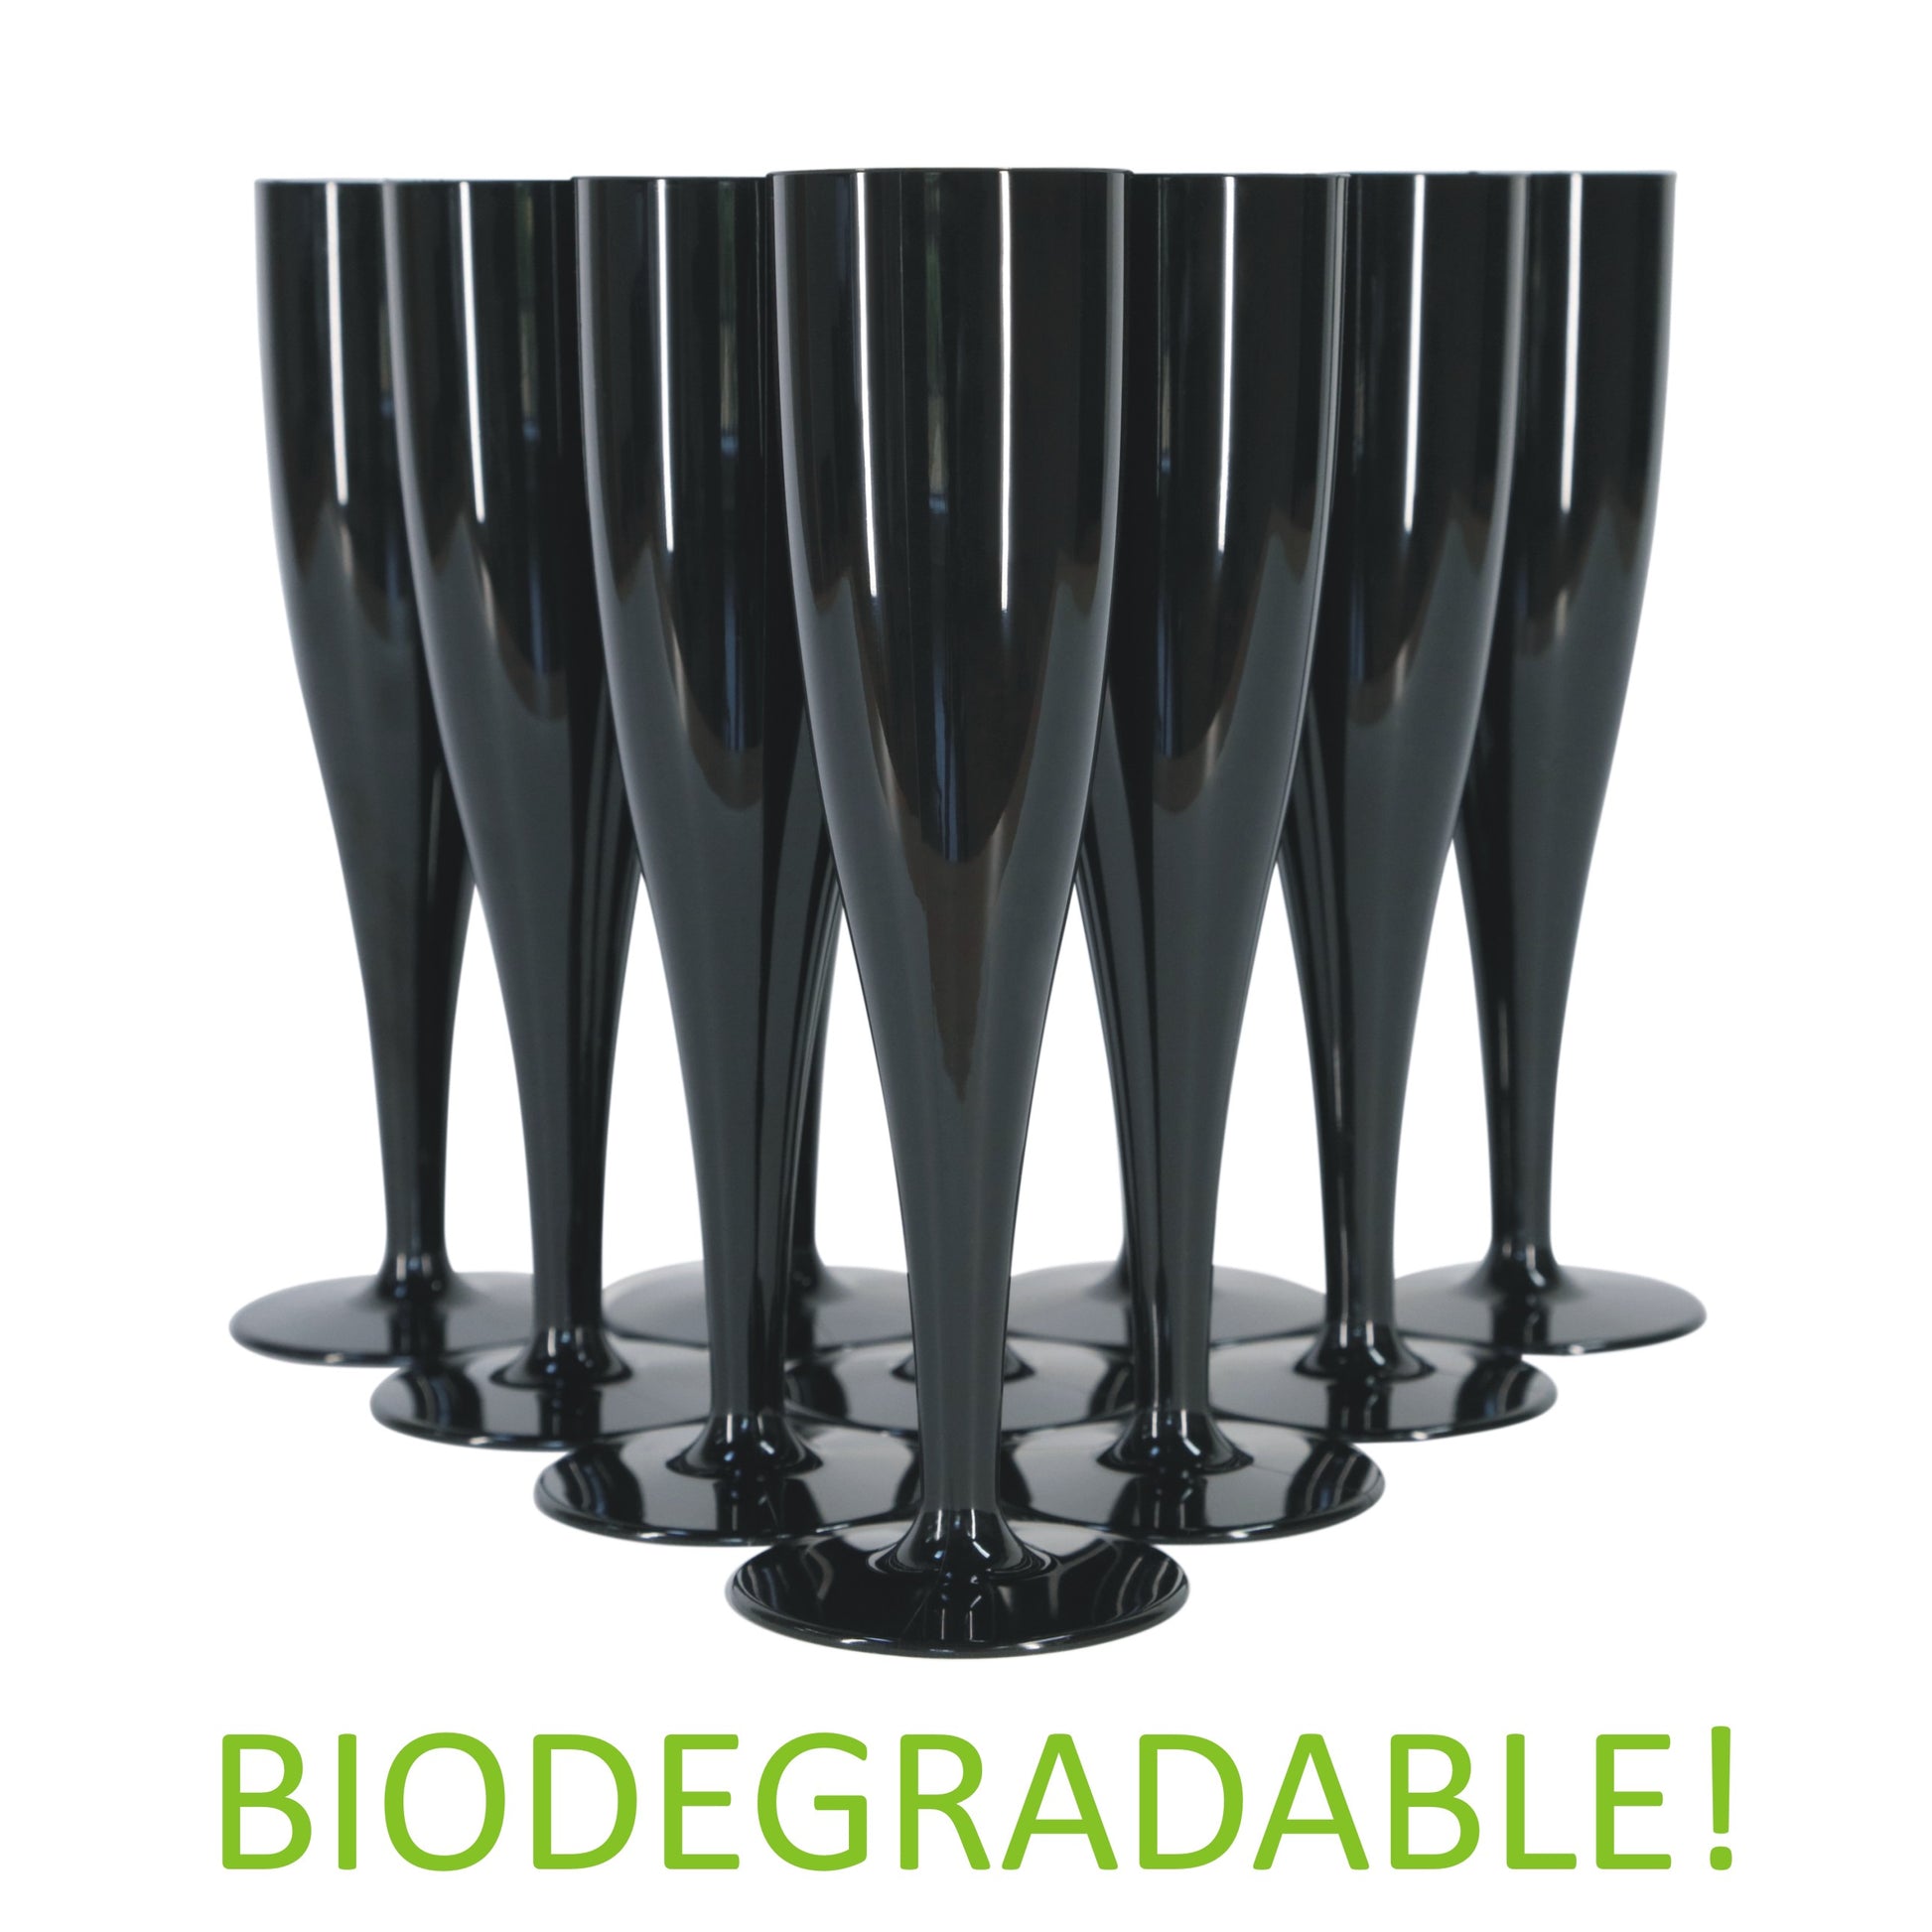 50 x Black Prosecco Flutes – Made from Biodegradable Material in glossy Bold Black Colour 1-Piece Champagne Glass (Pack of 50 Glasses) for use Indoors and Outdoors, Halloween, Parties, BBQ, Hen Do-5056020186786-EY-PP-117-Product Pro-Black Flutes, Champagne Flute, Champagne Glasses, Flutes, Prosecco Flute, Prosecco Glasses